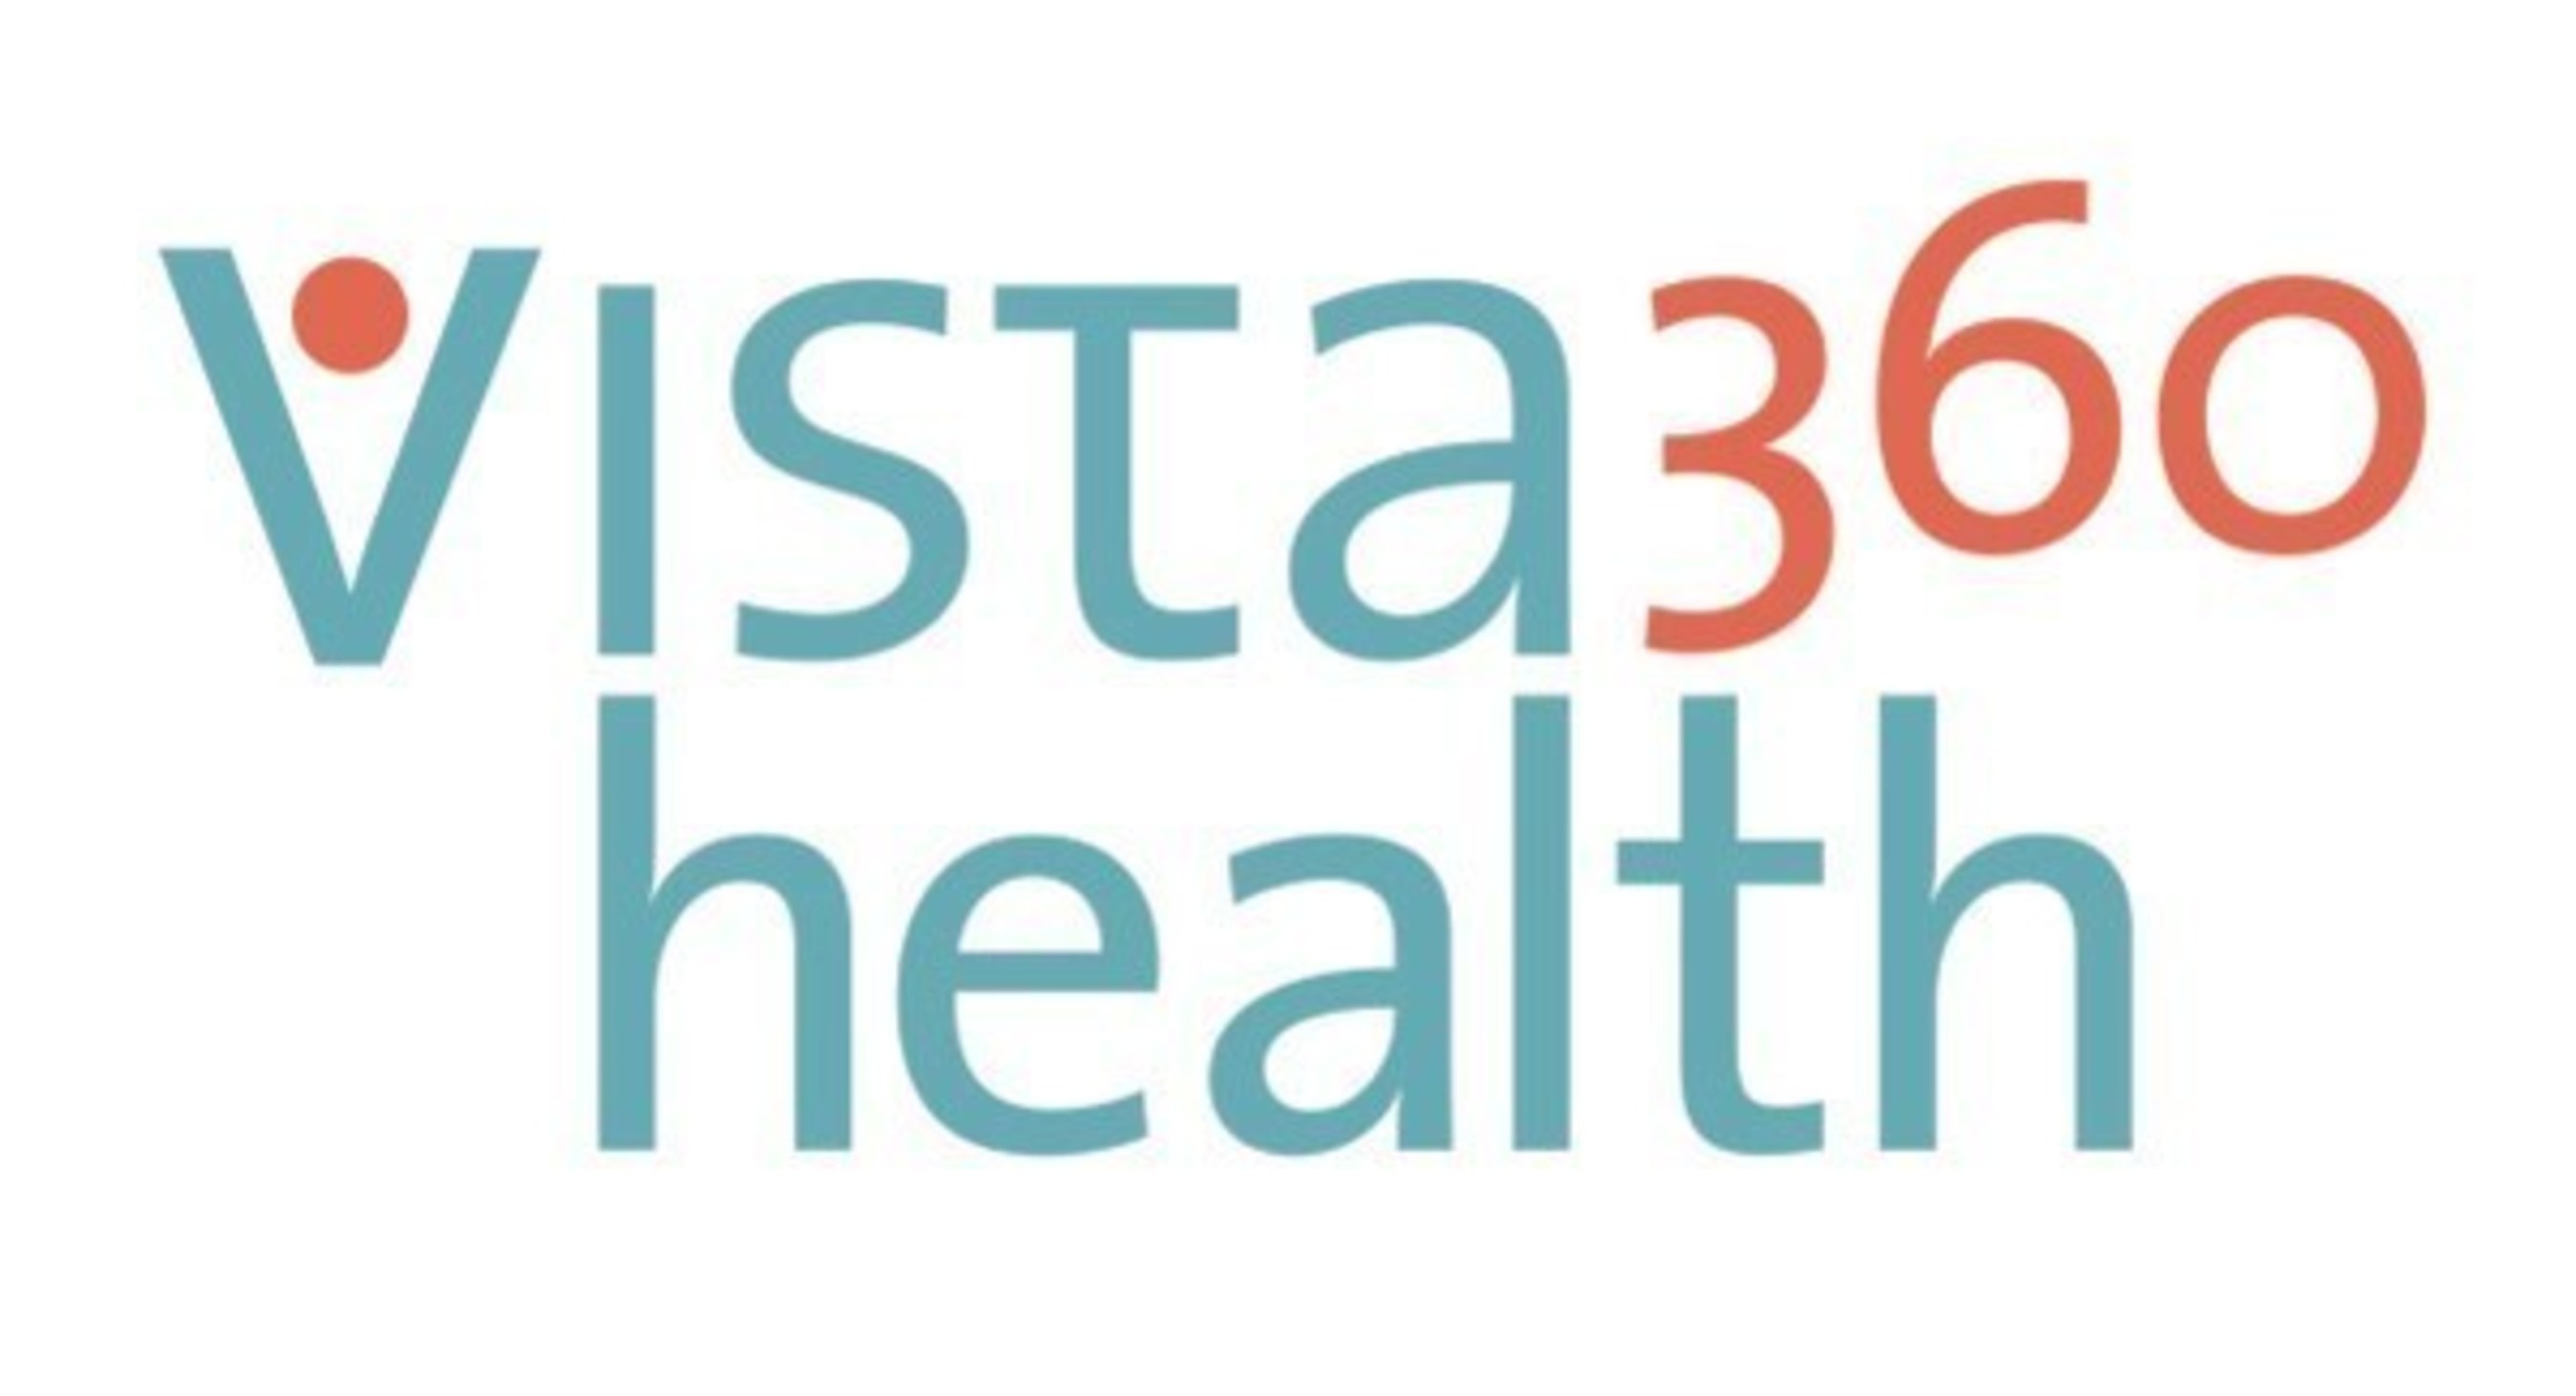 Vista360health was first incepted in 1994 and has made a resurgence as an Austin, Texas home-grown HMO health plan.